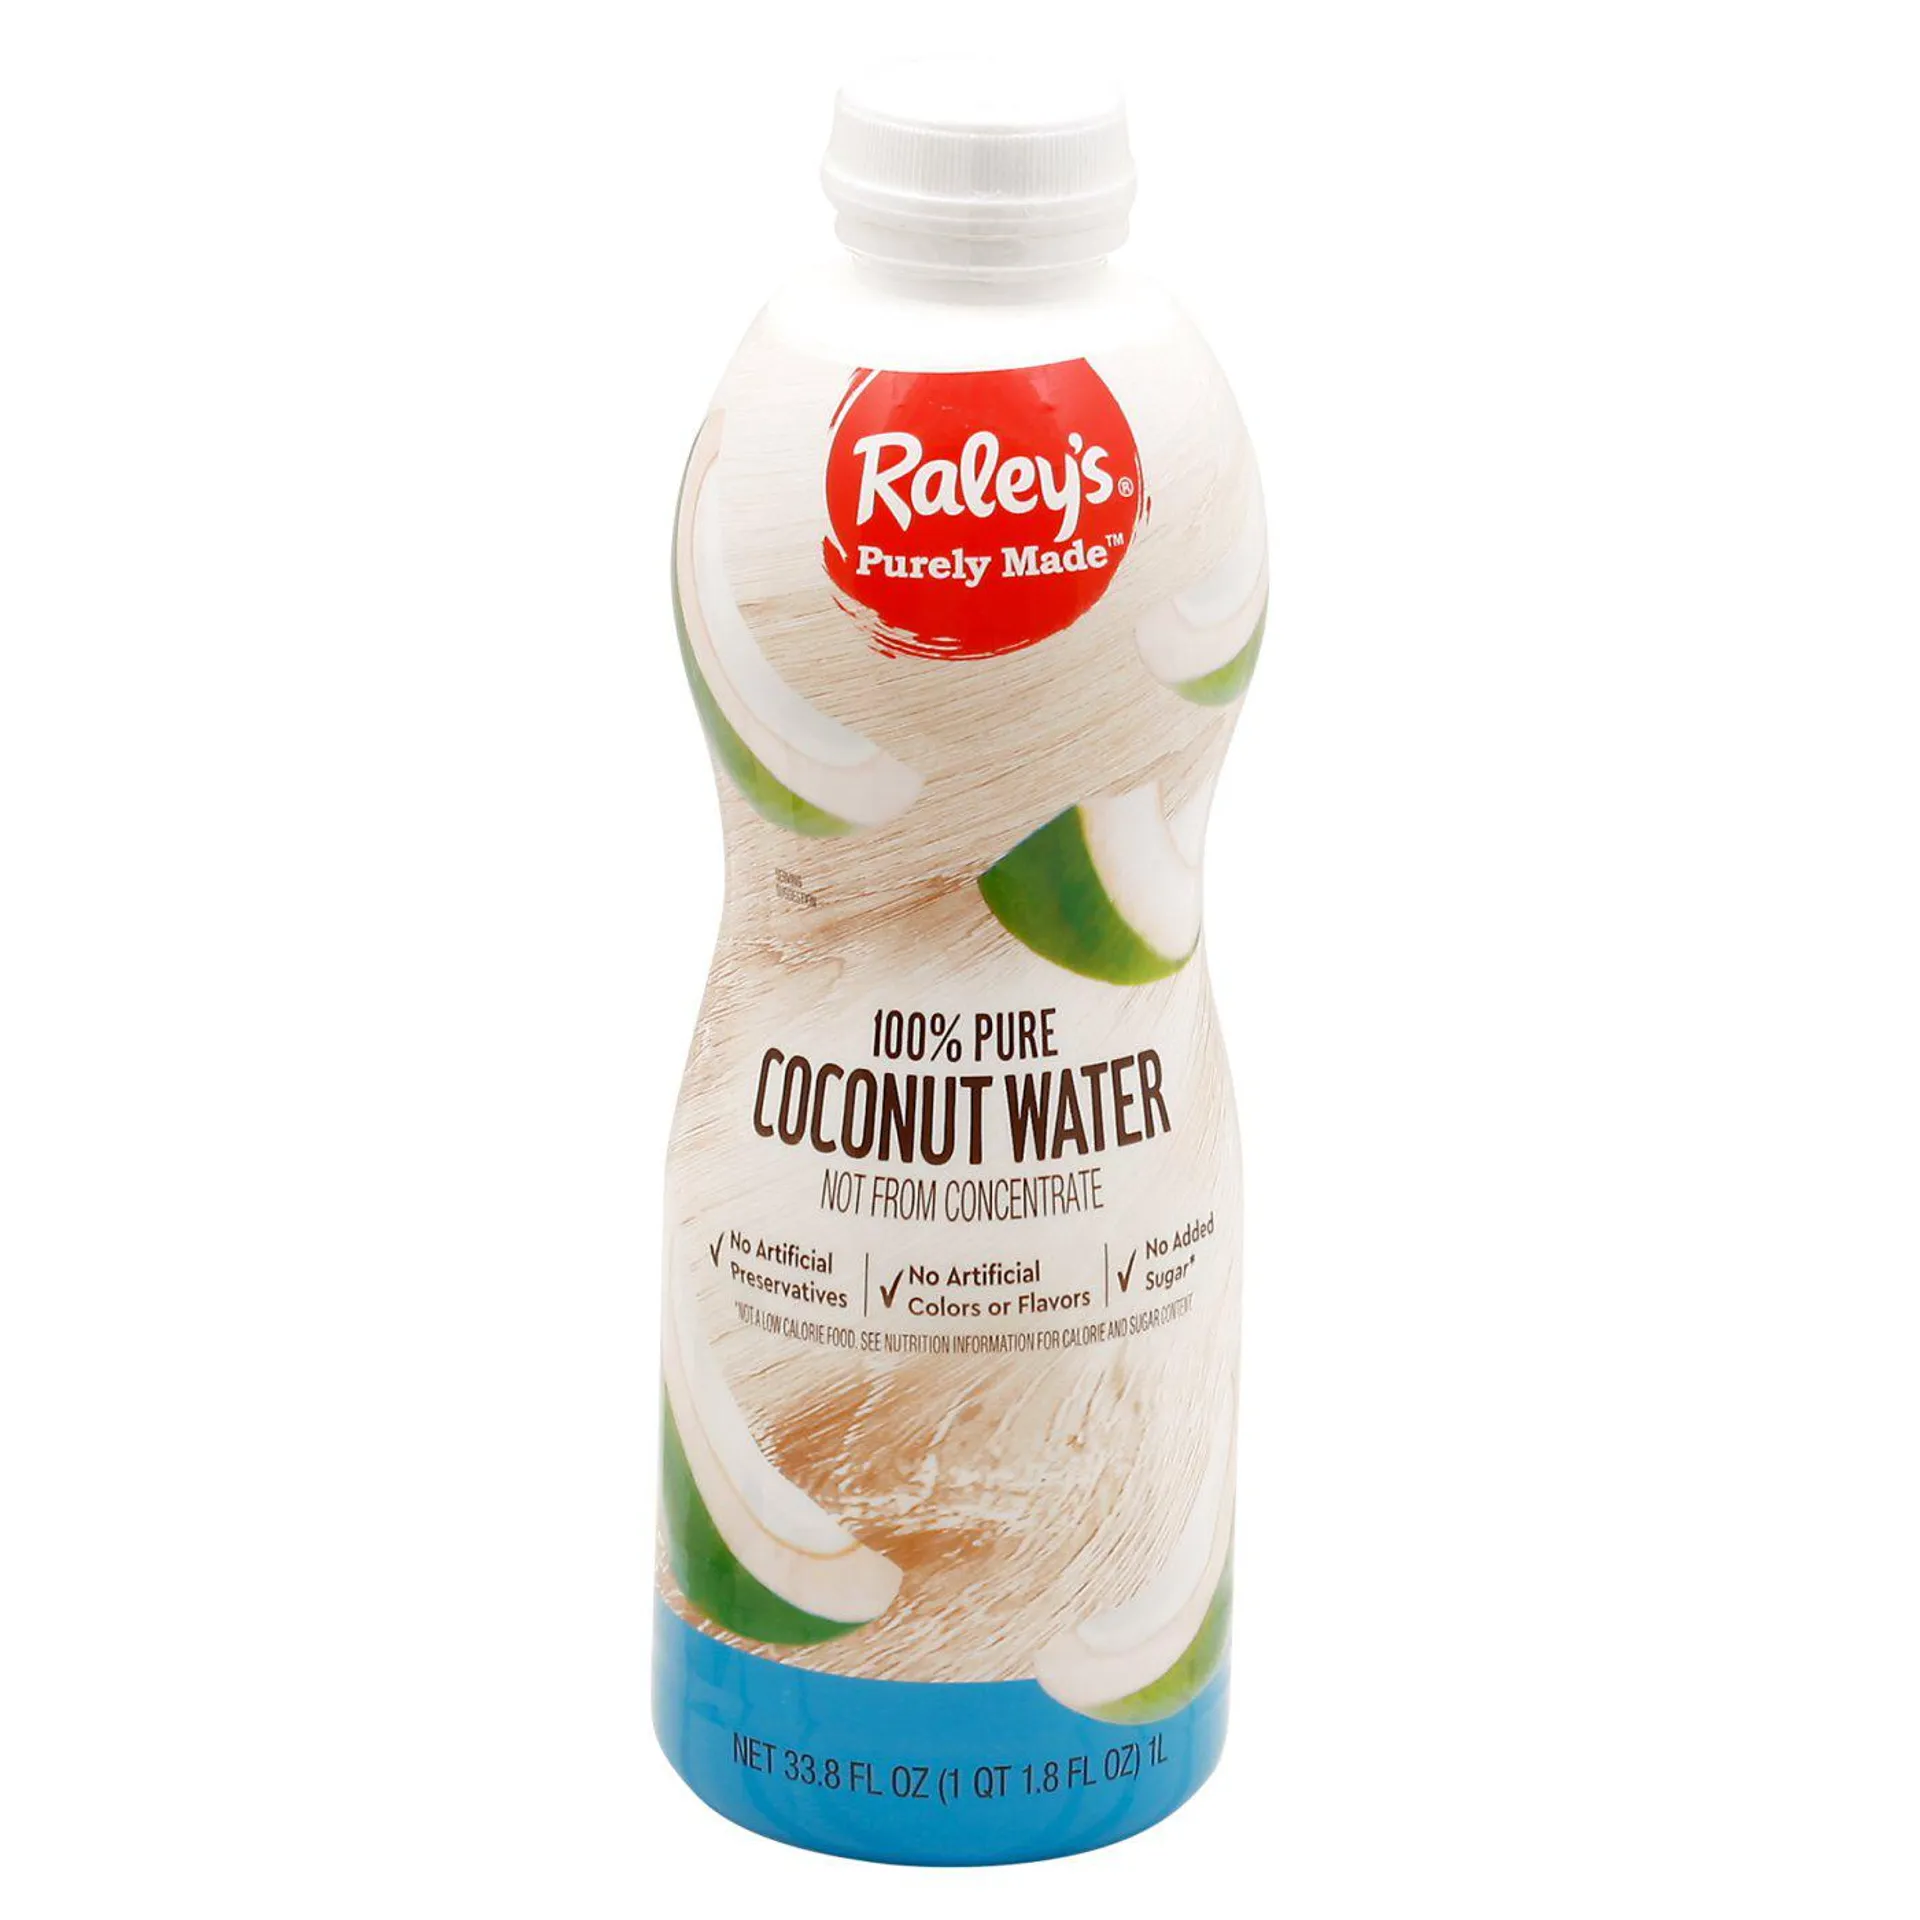 Raley's Purely Made 100% Coconut Water